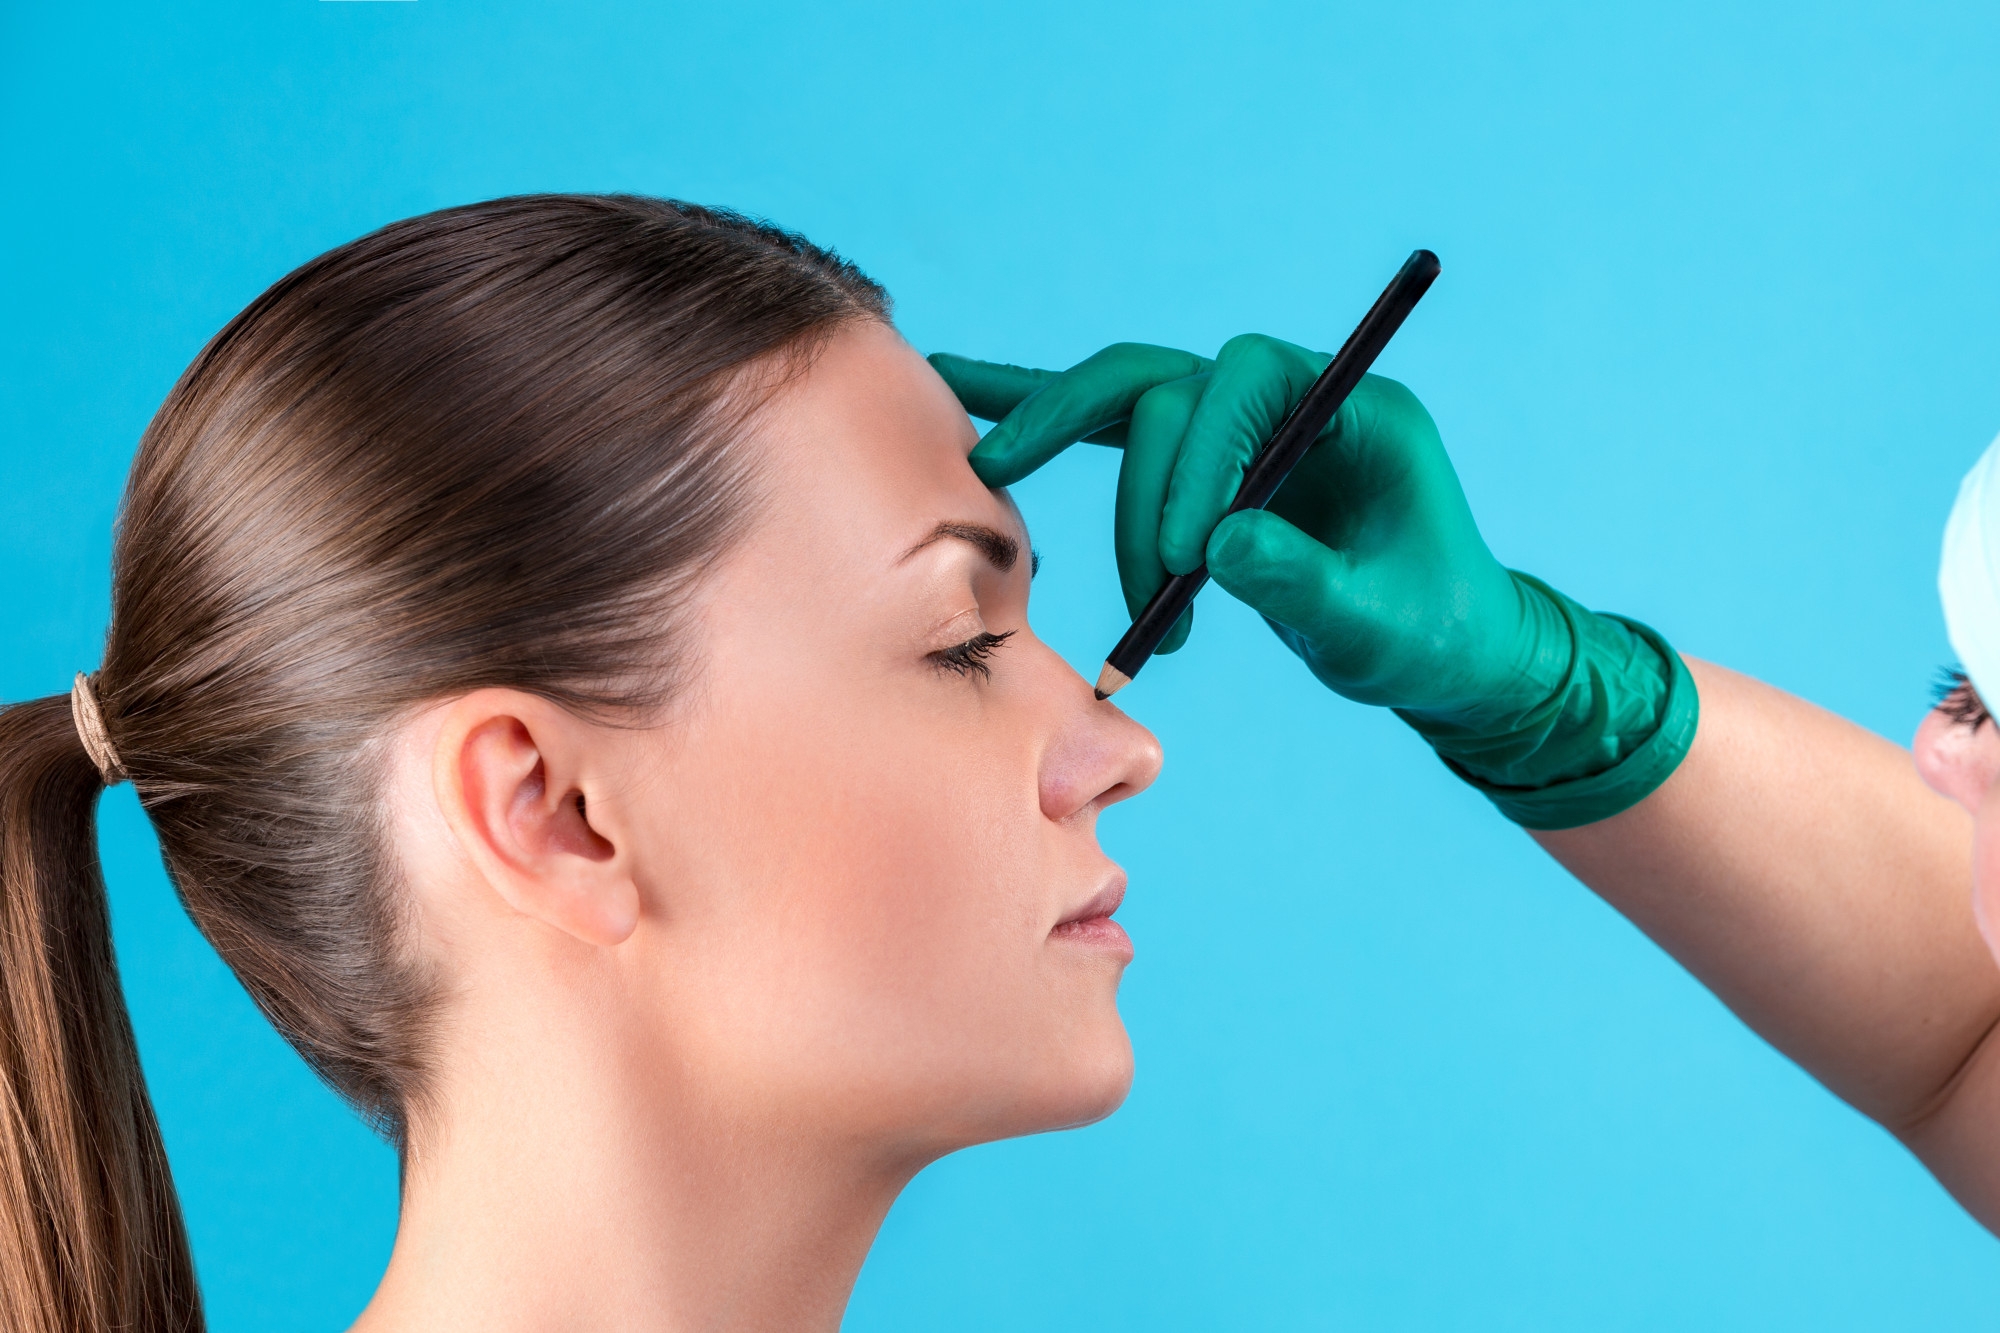 cosmetic-surgeon-examining-female-client-office-doctor-draws-lines-with-marker-eyelid-before-plastic-surgery-blepharoplasty-surgeon-beautician-hands-touching-woman-face-rhinoplasty